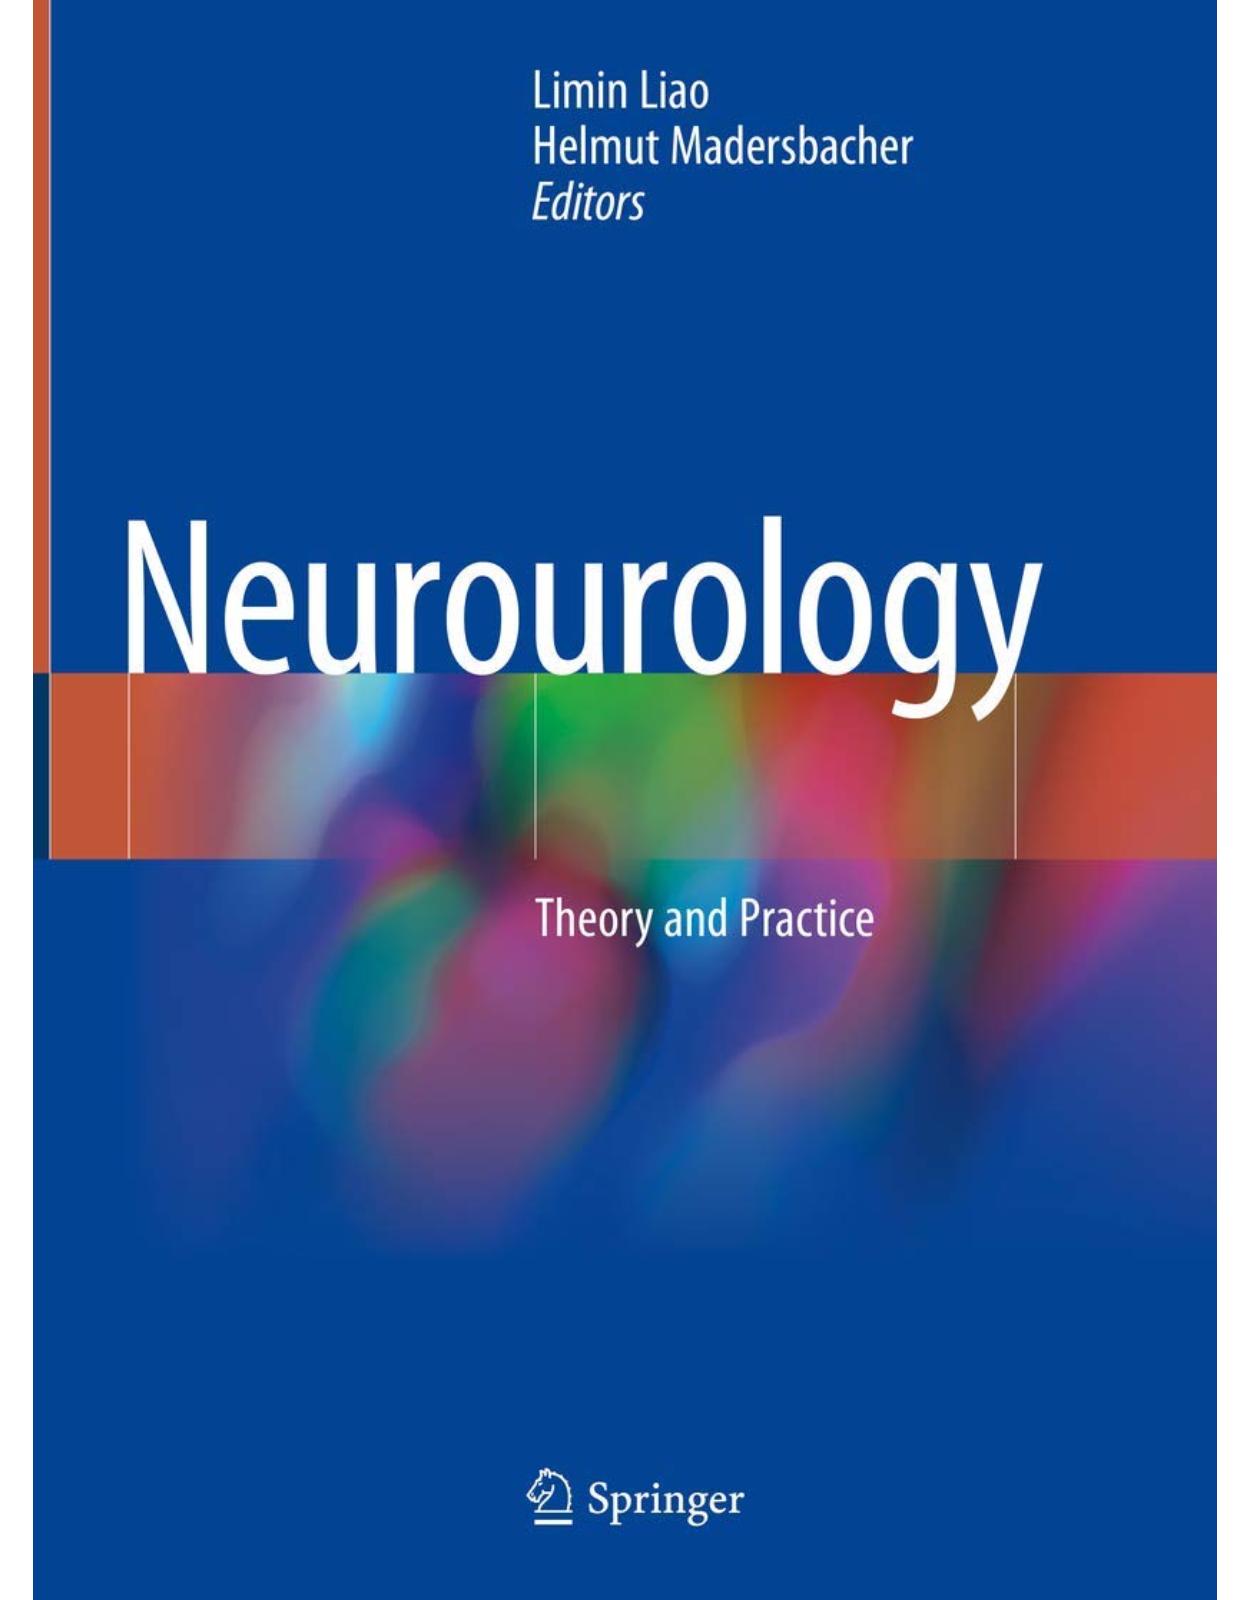 Neurourology: Theory and Practice